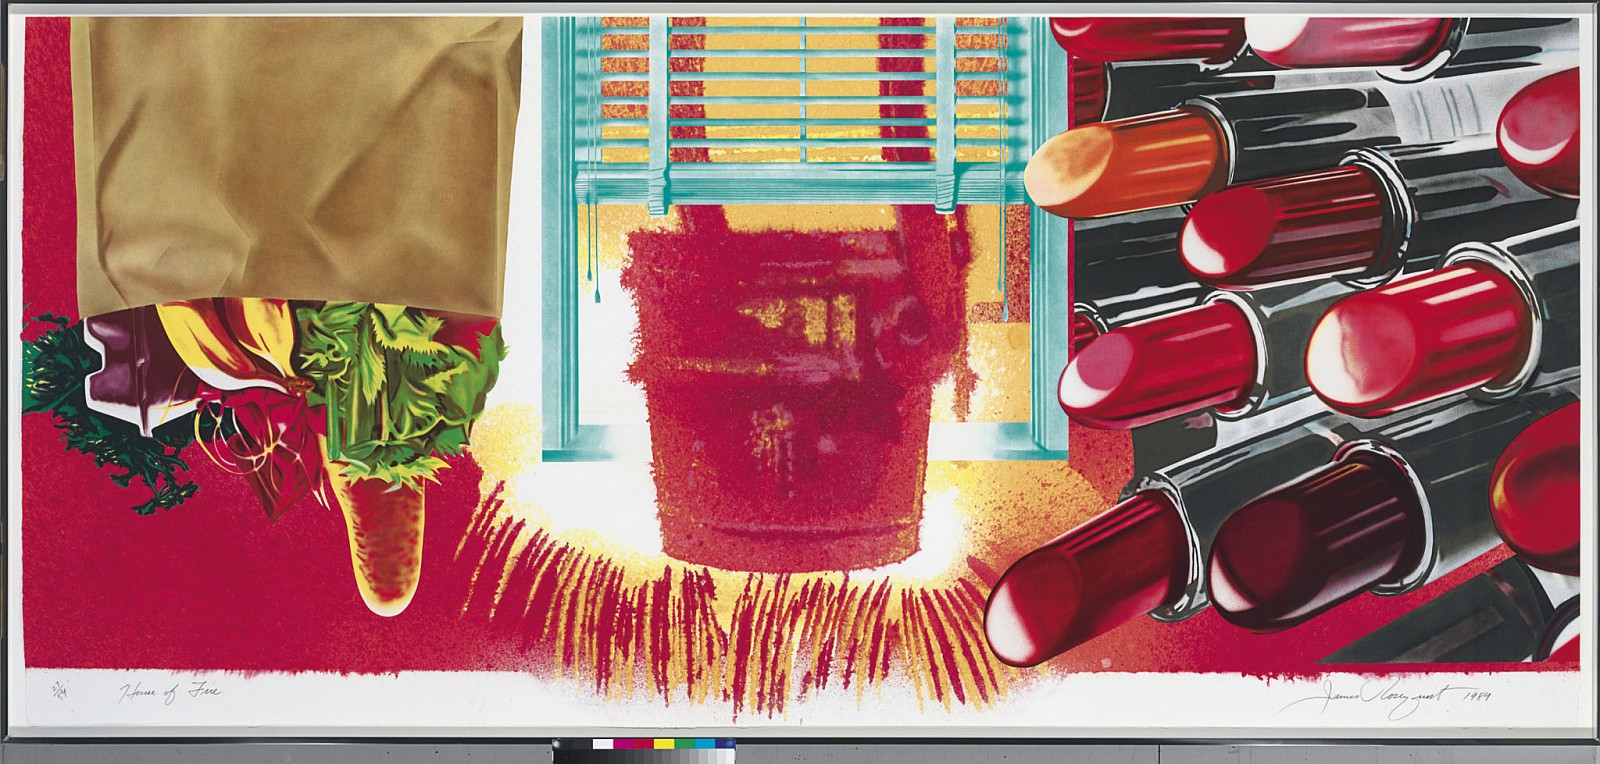 James Rosenquist, House of Fire, 1988 - 1989
Colored, Pressed Paper Pulp, 54 1/2 x 119 3/4 inches